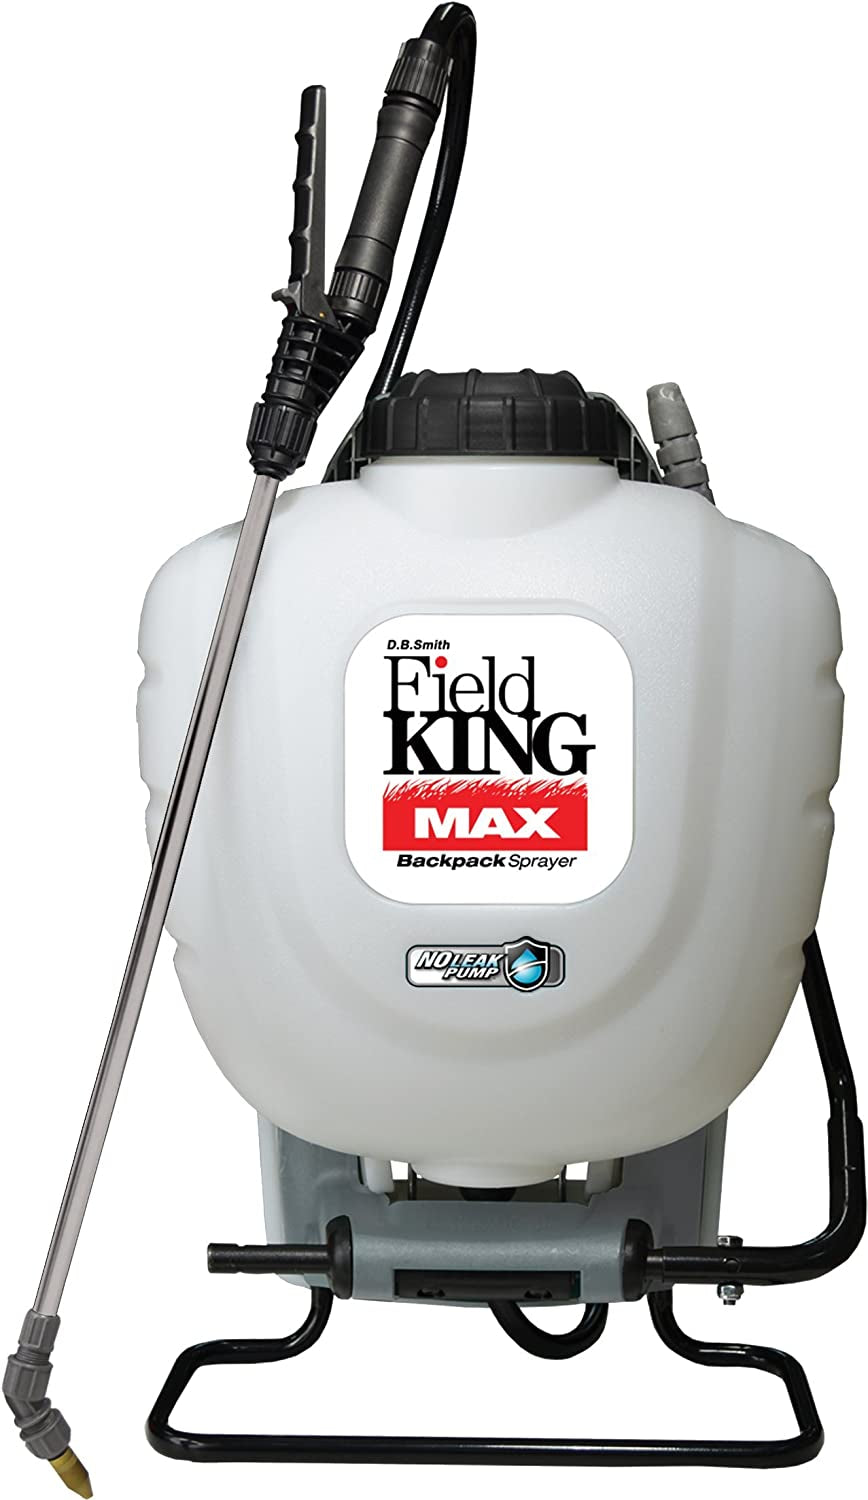 Field King, Field King Max 190348 Backpack Sprayer for Professionals Applying Herbicides, White, 4 Gallon